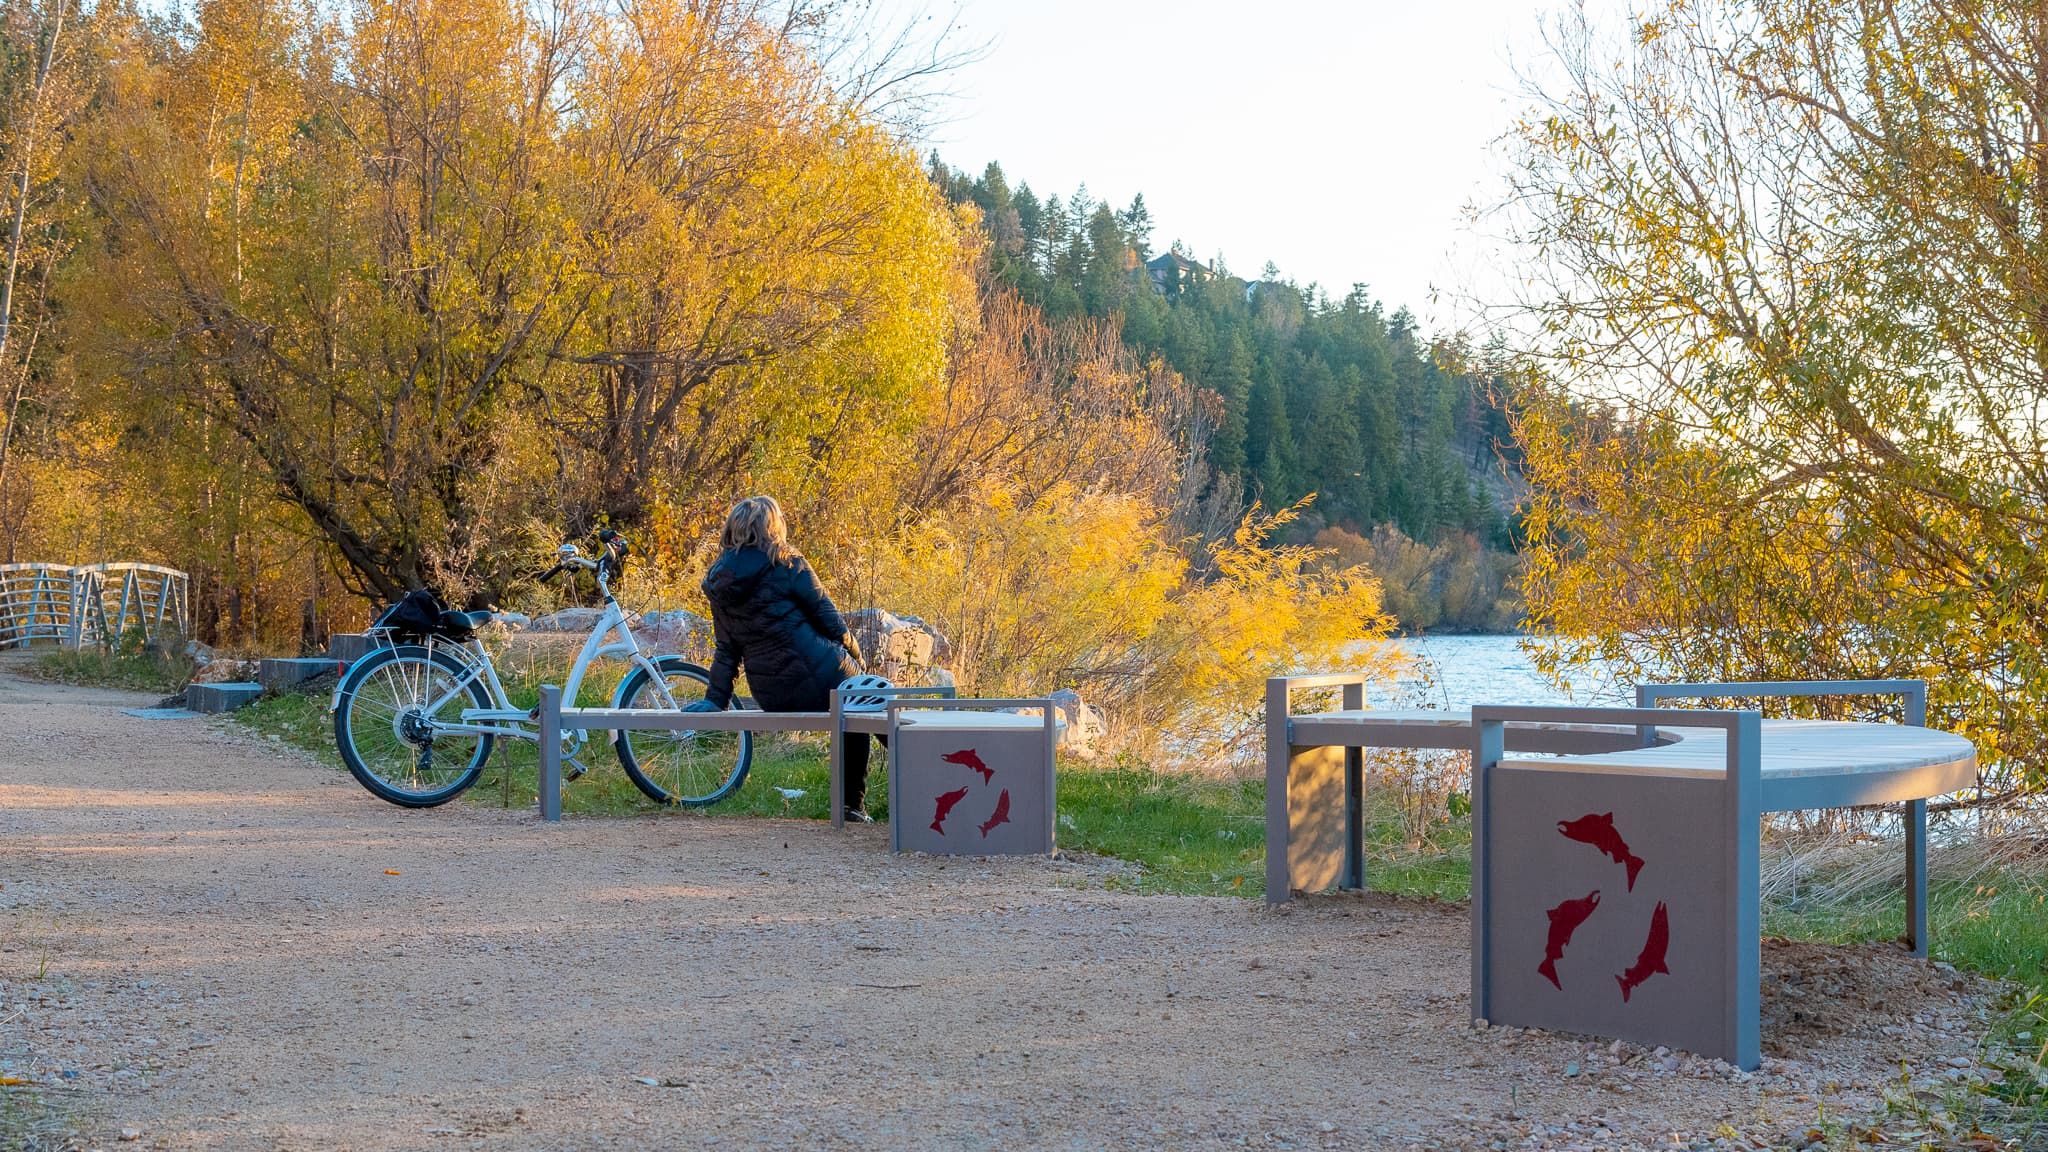 The Okanagan Rail Trail Committee (ORTC) is an interjurisdictional group tasked with managing a 50km biking and walking trail with a rich history in British Columbia, Canada: The Okanagan Rail Trail.